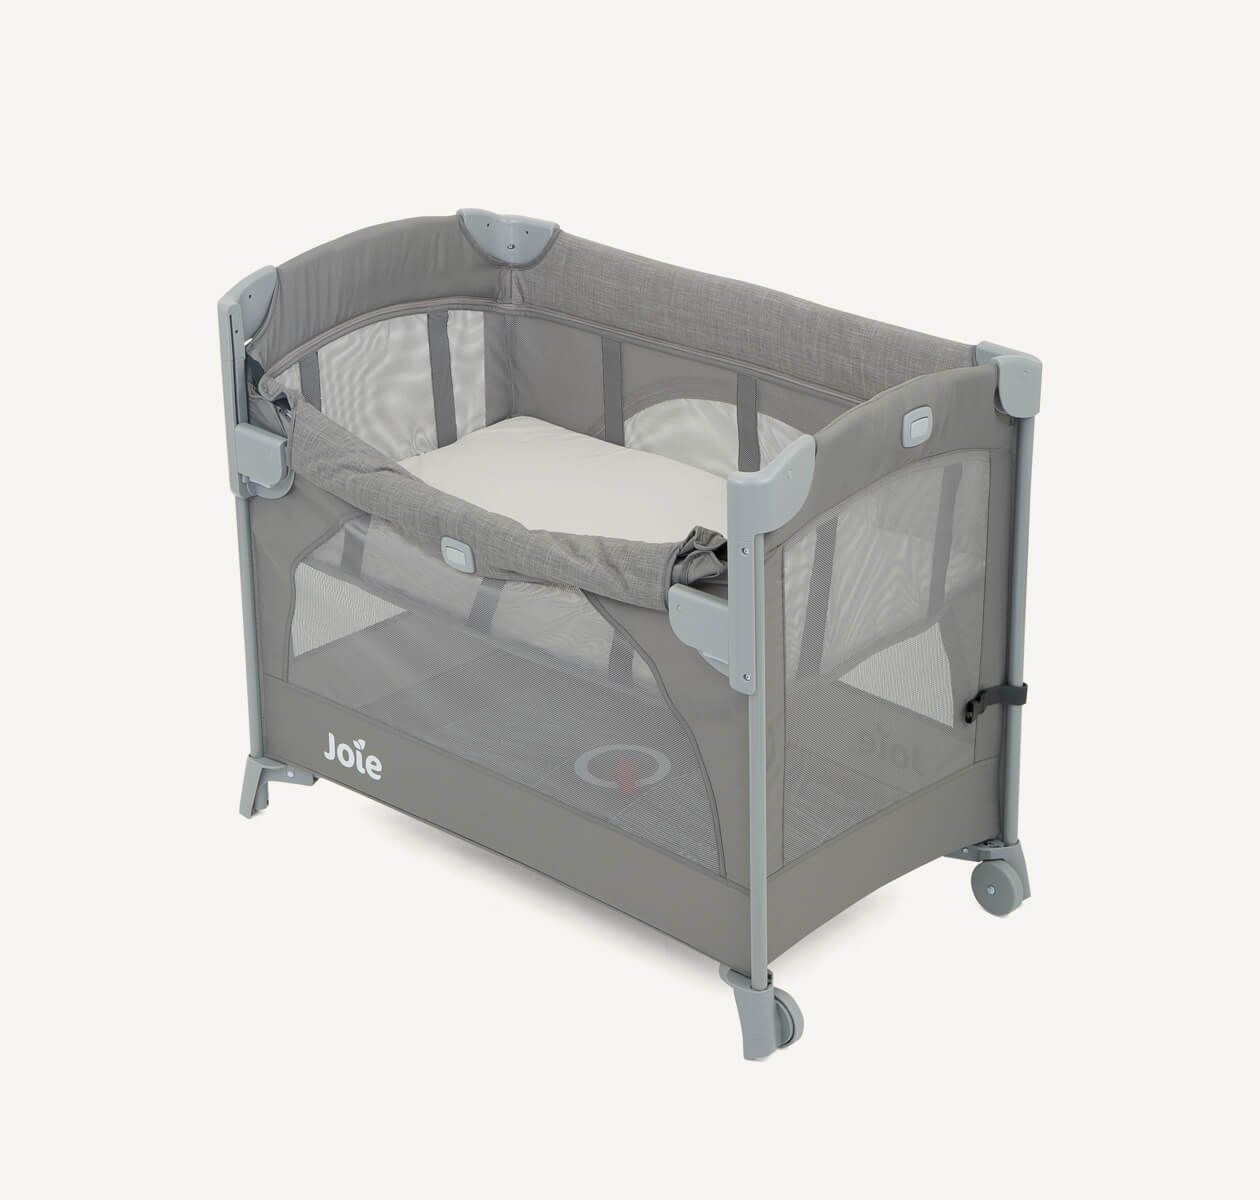 Joie kubbie sleep bedside cot in gray with drop down side down at an angle.